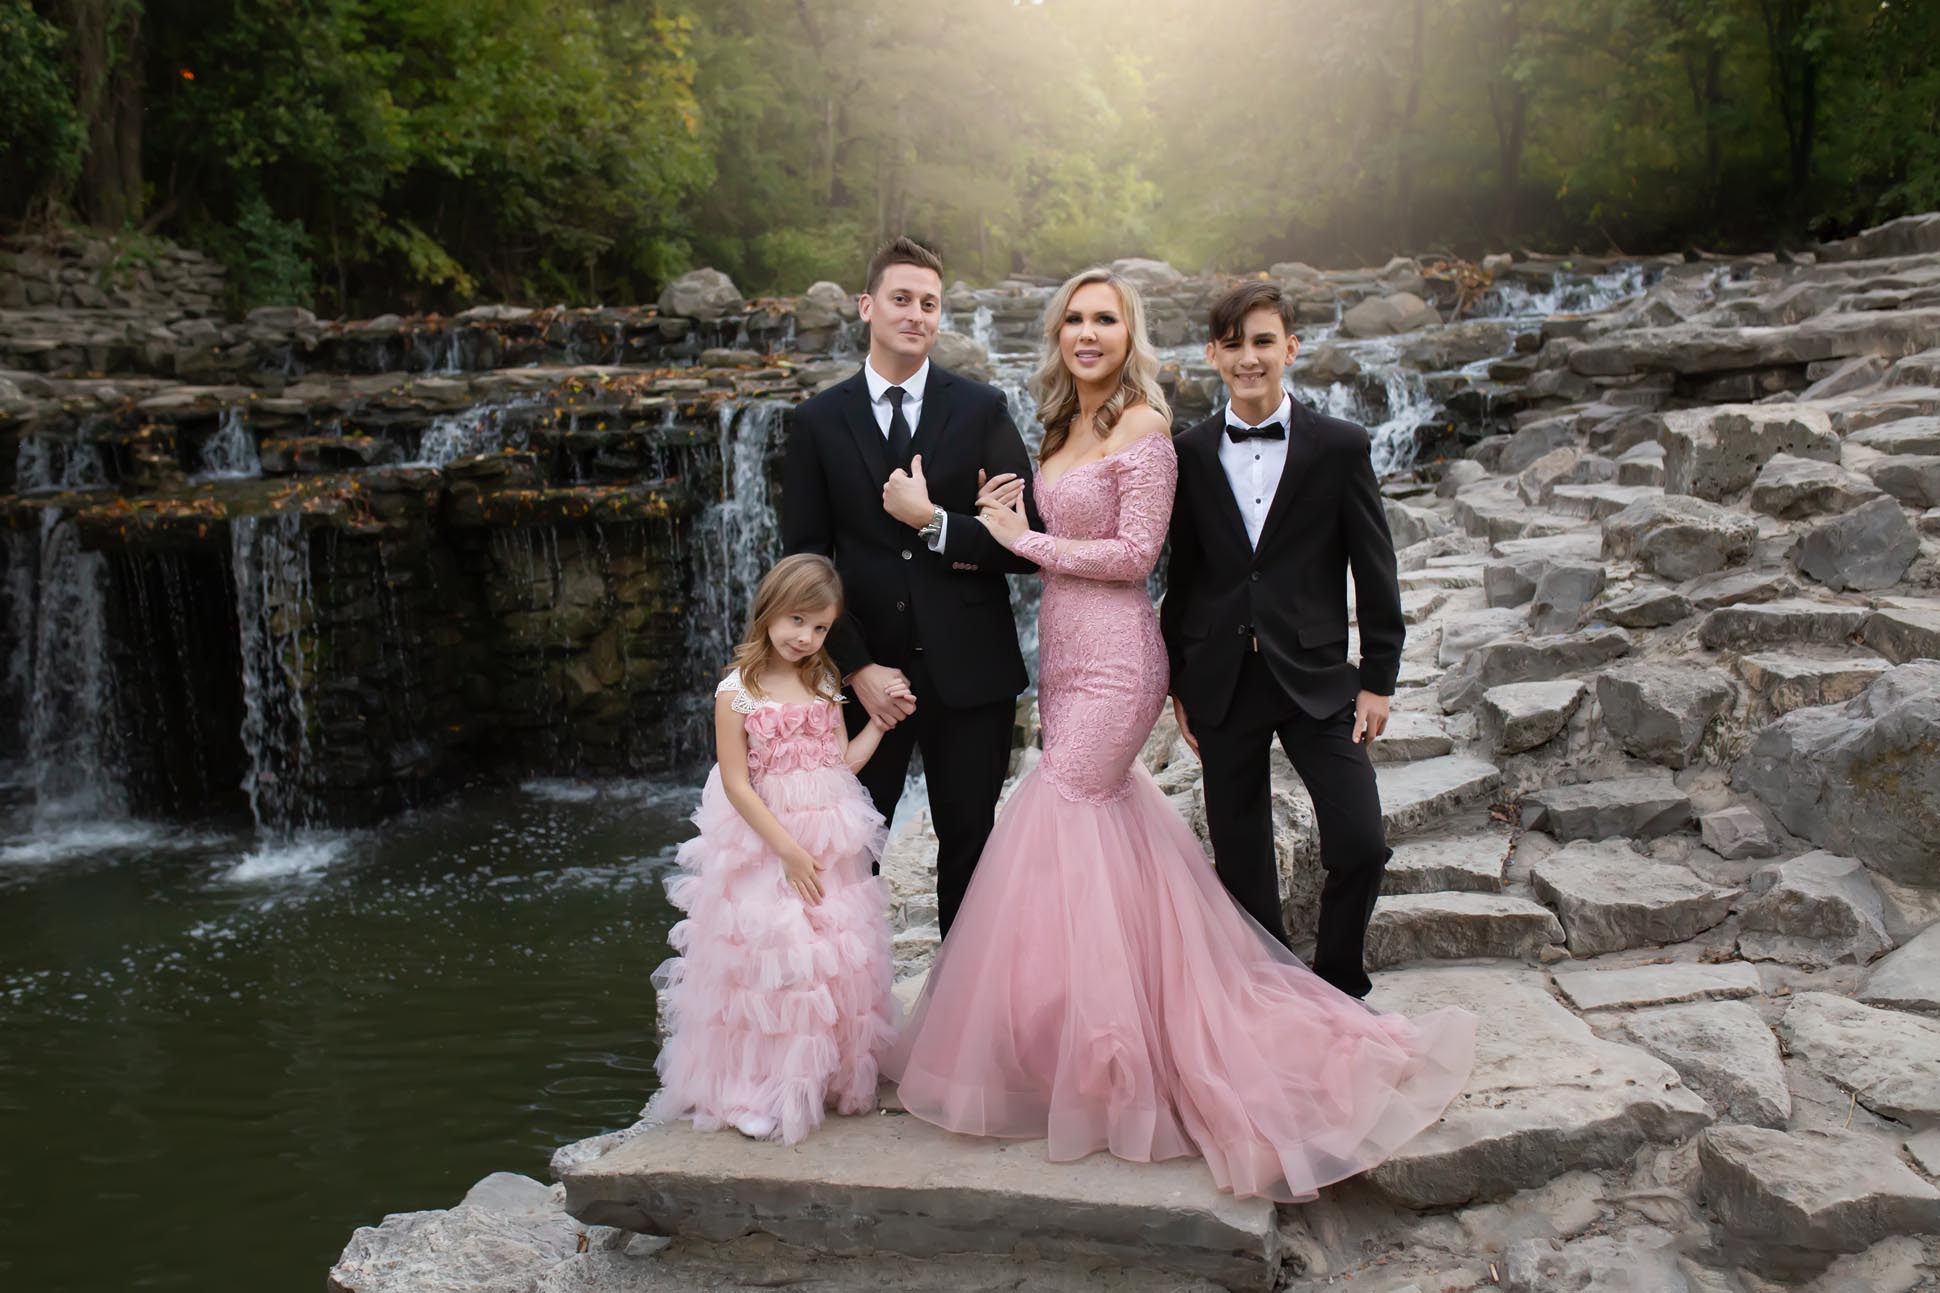 Dallas family photographer shares portrait of family in front of waterfall at Prairie Creek Park in Richardson Texas